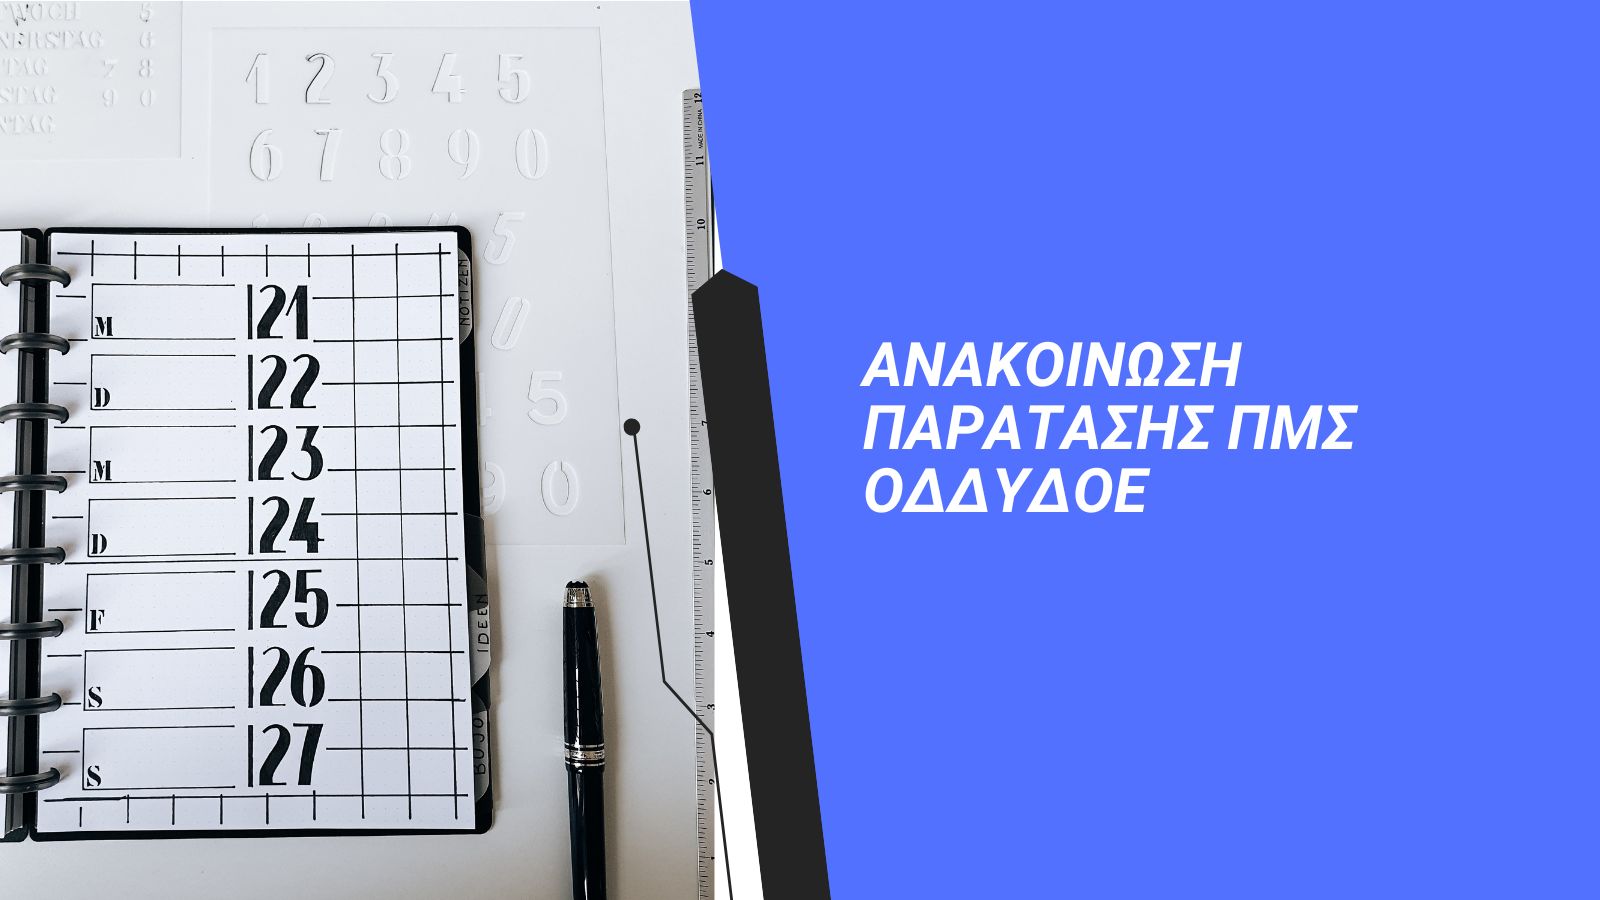 Read more about the article ΑΝΑΚΟΙΝΩΣΗ ΠΑΡΑΤΑΣΗΣ ΠΜΣ ΟΔΔΥΔΟΕ